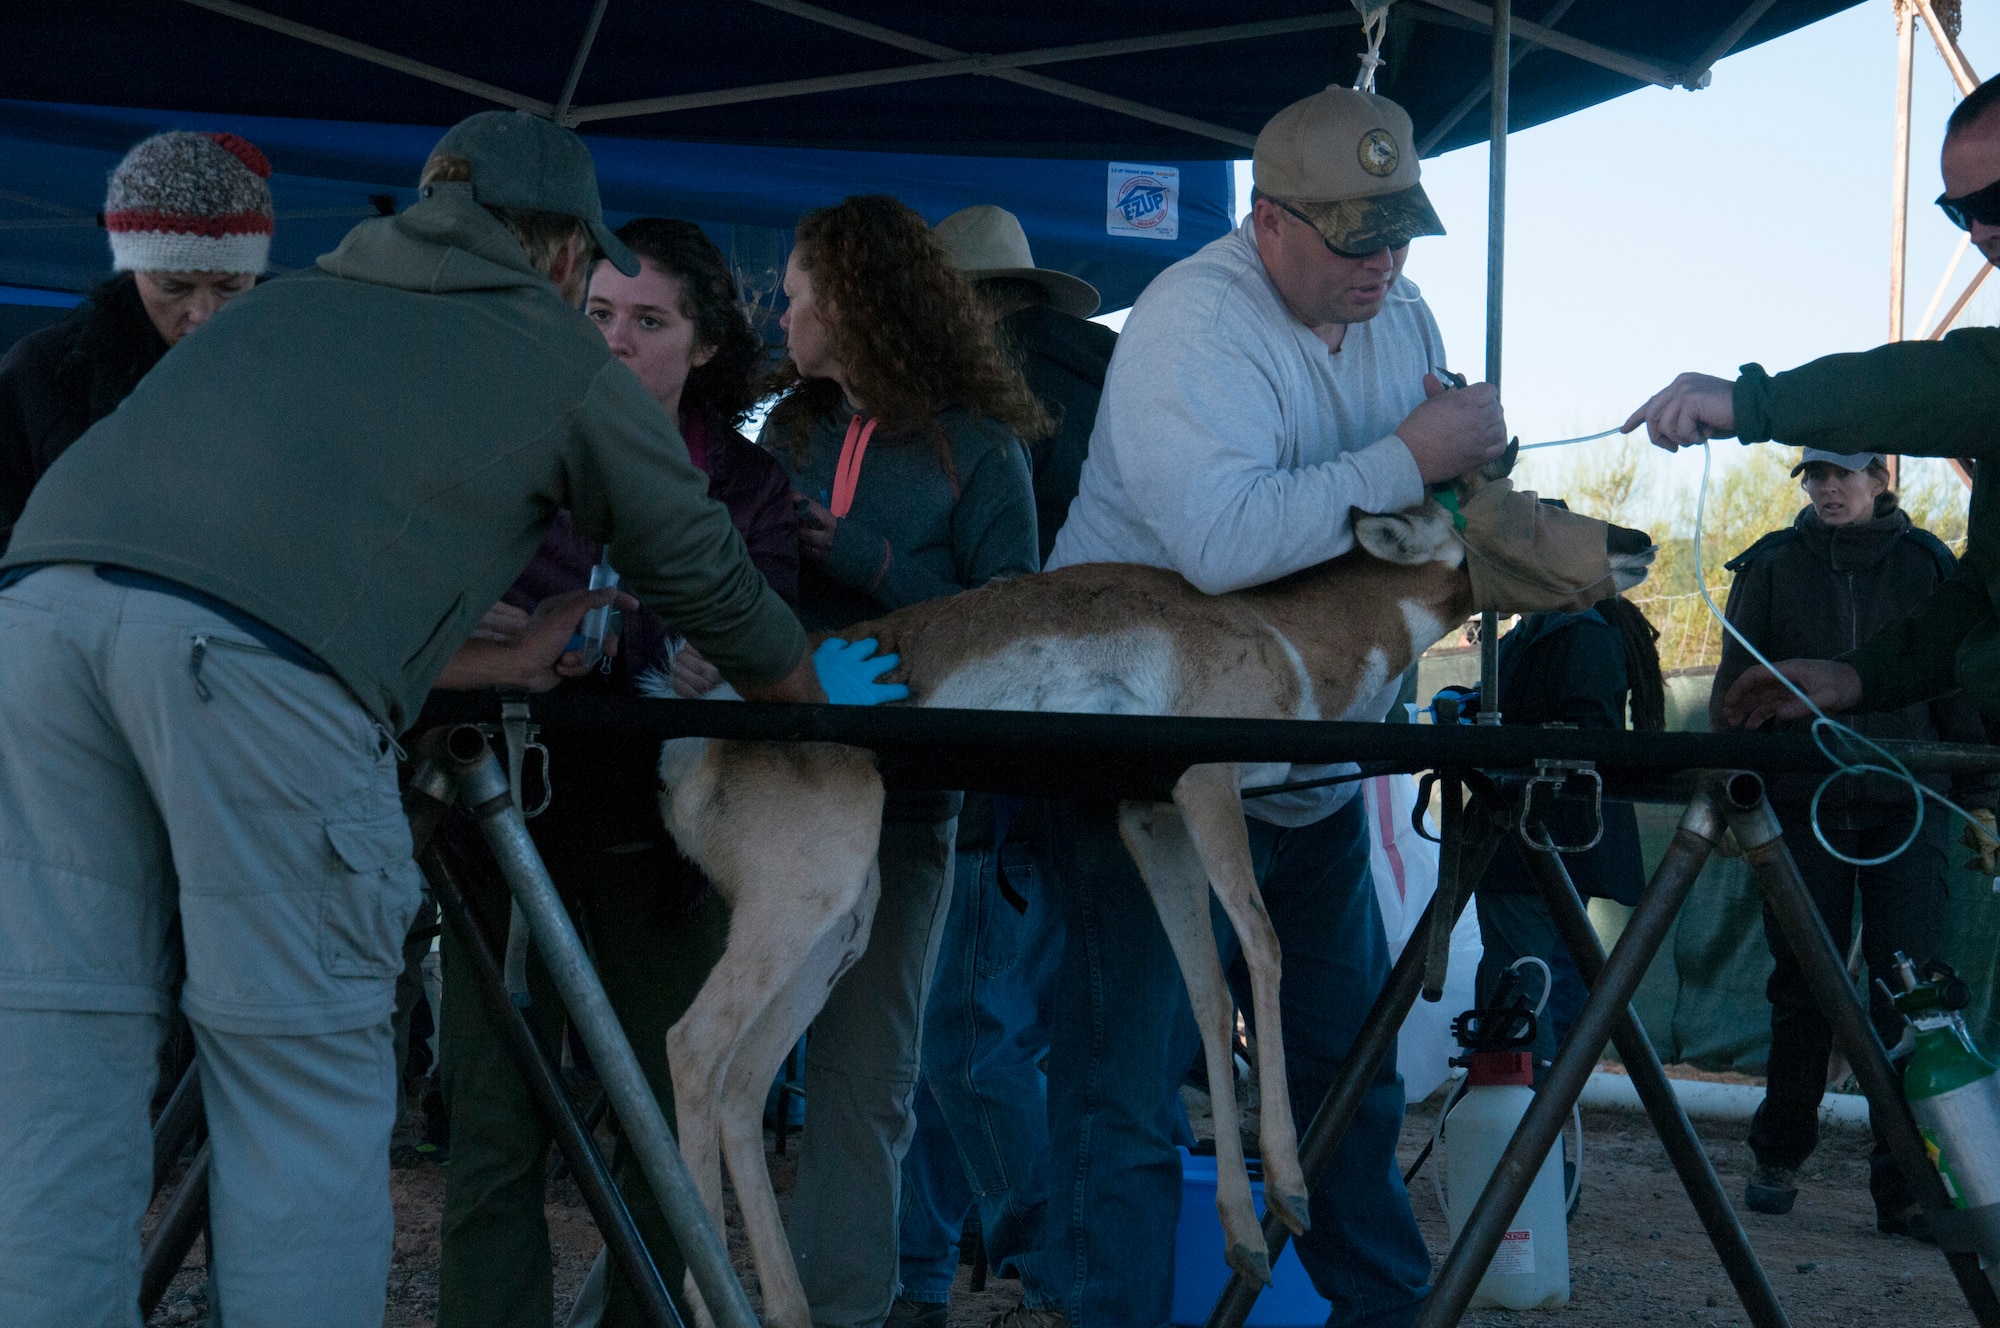 A recovery team at the Barry M. Goldwater Range in Arizona secures a Sonoran pronghorn while marking and veterinary teams process it for relocation. The endangered population crashed to a low of just 21 animals in 2002, prompting the initiation of a full-scale recovery effort there. (U.S. Air Force Photo/Monica Guevara/Released)